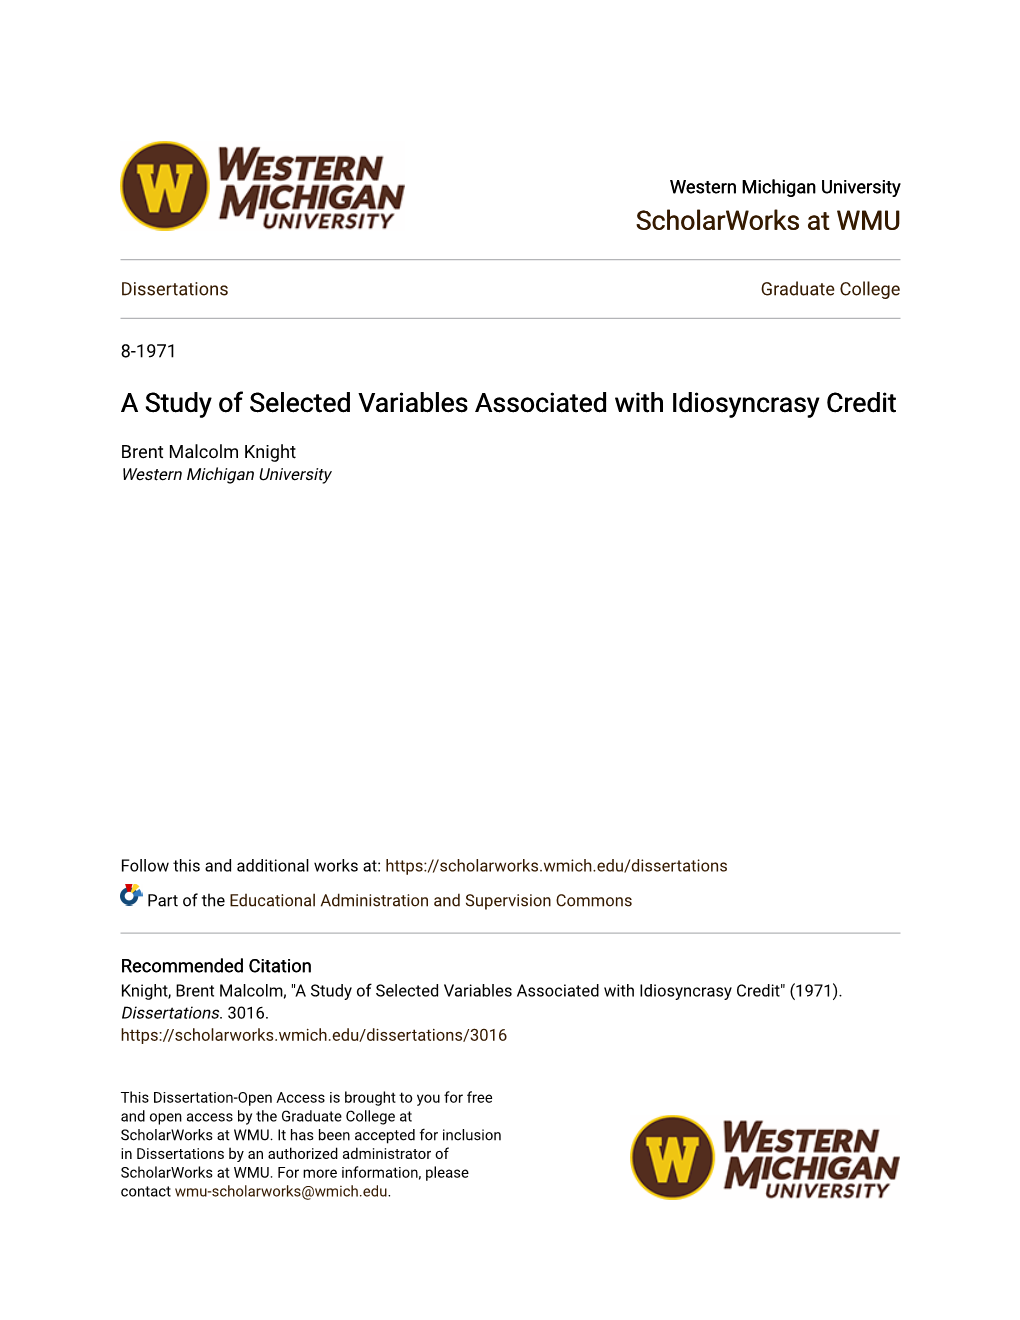 A Study of Selected Variables Associated with Idiosyncrasy Credit